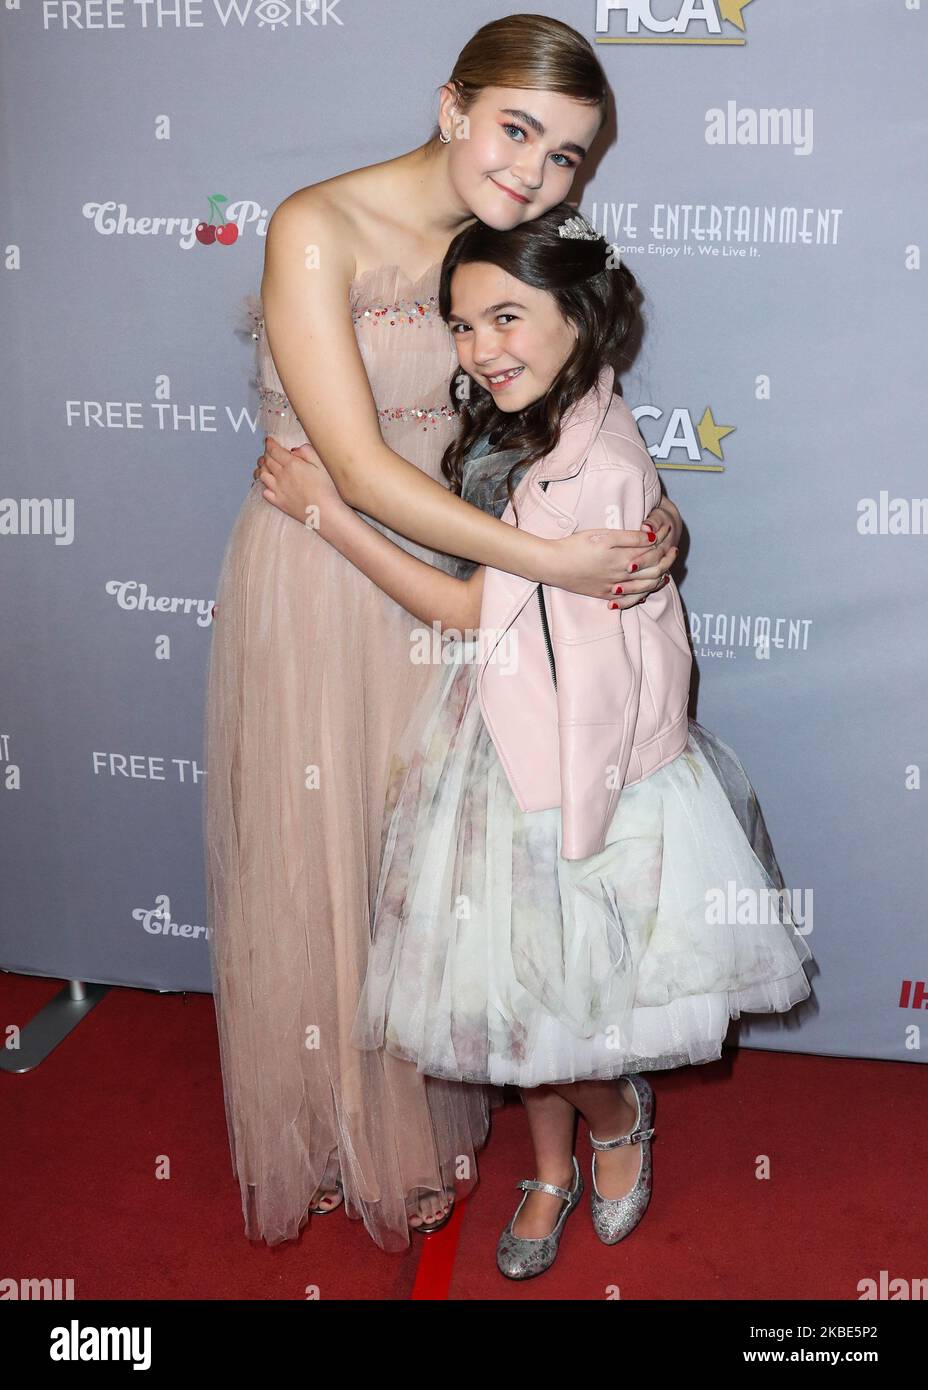 HOLLYWOOD, LOS ANGELES, CALIFORNIA, USA - JANUARY 09: Millicent Simmonds and Brooklyn Prince arrive at the 3rd Annual Hollywood Critics' Awards held at the Taglyan Cultural Complex on January 9, 2020 in Hollywood, Los Angeles, California, United States. (Photo by Xavier Collin/Image Press Agency/NurPhoto) Stock Photo